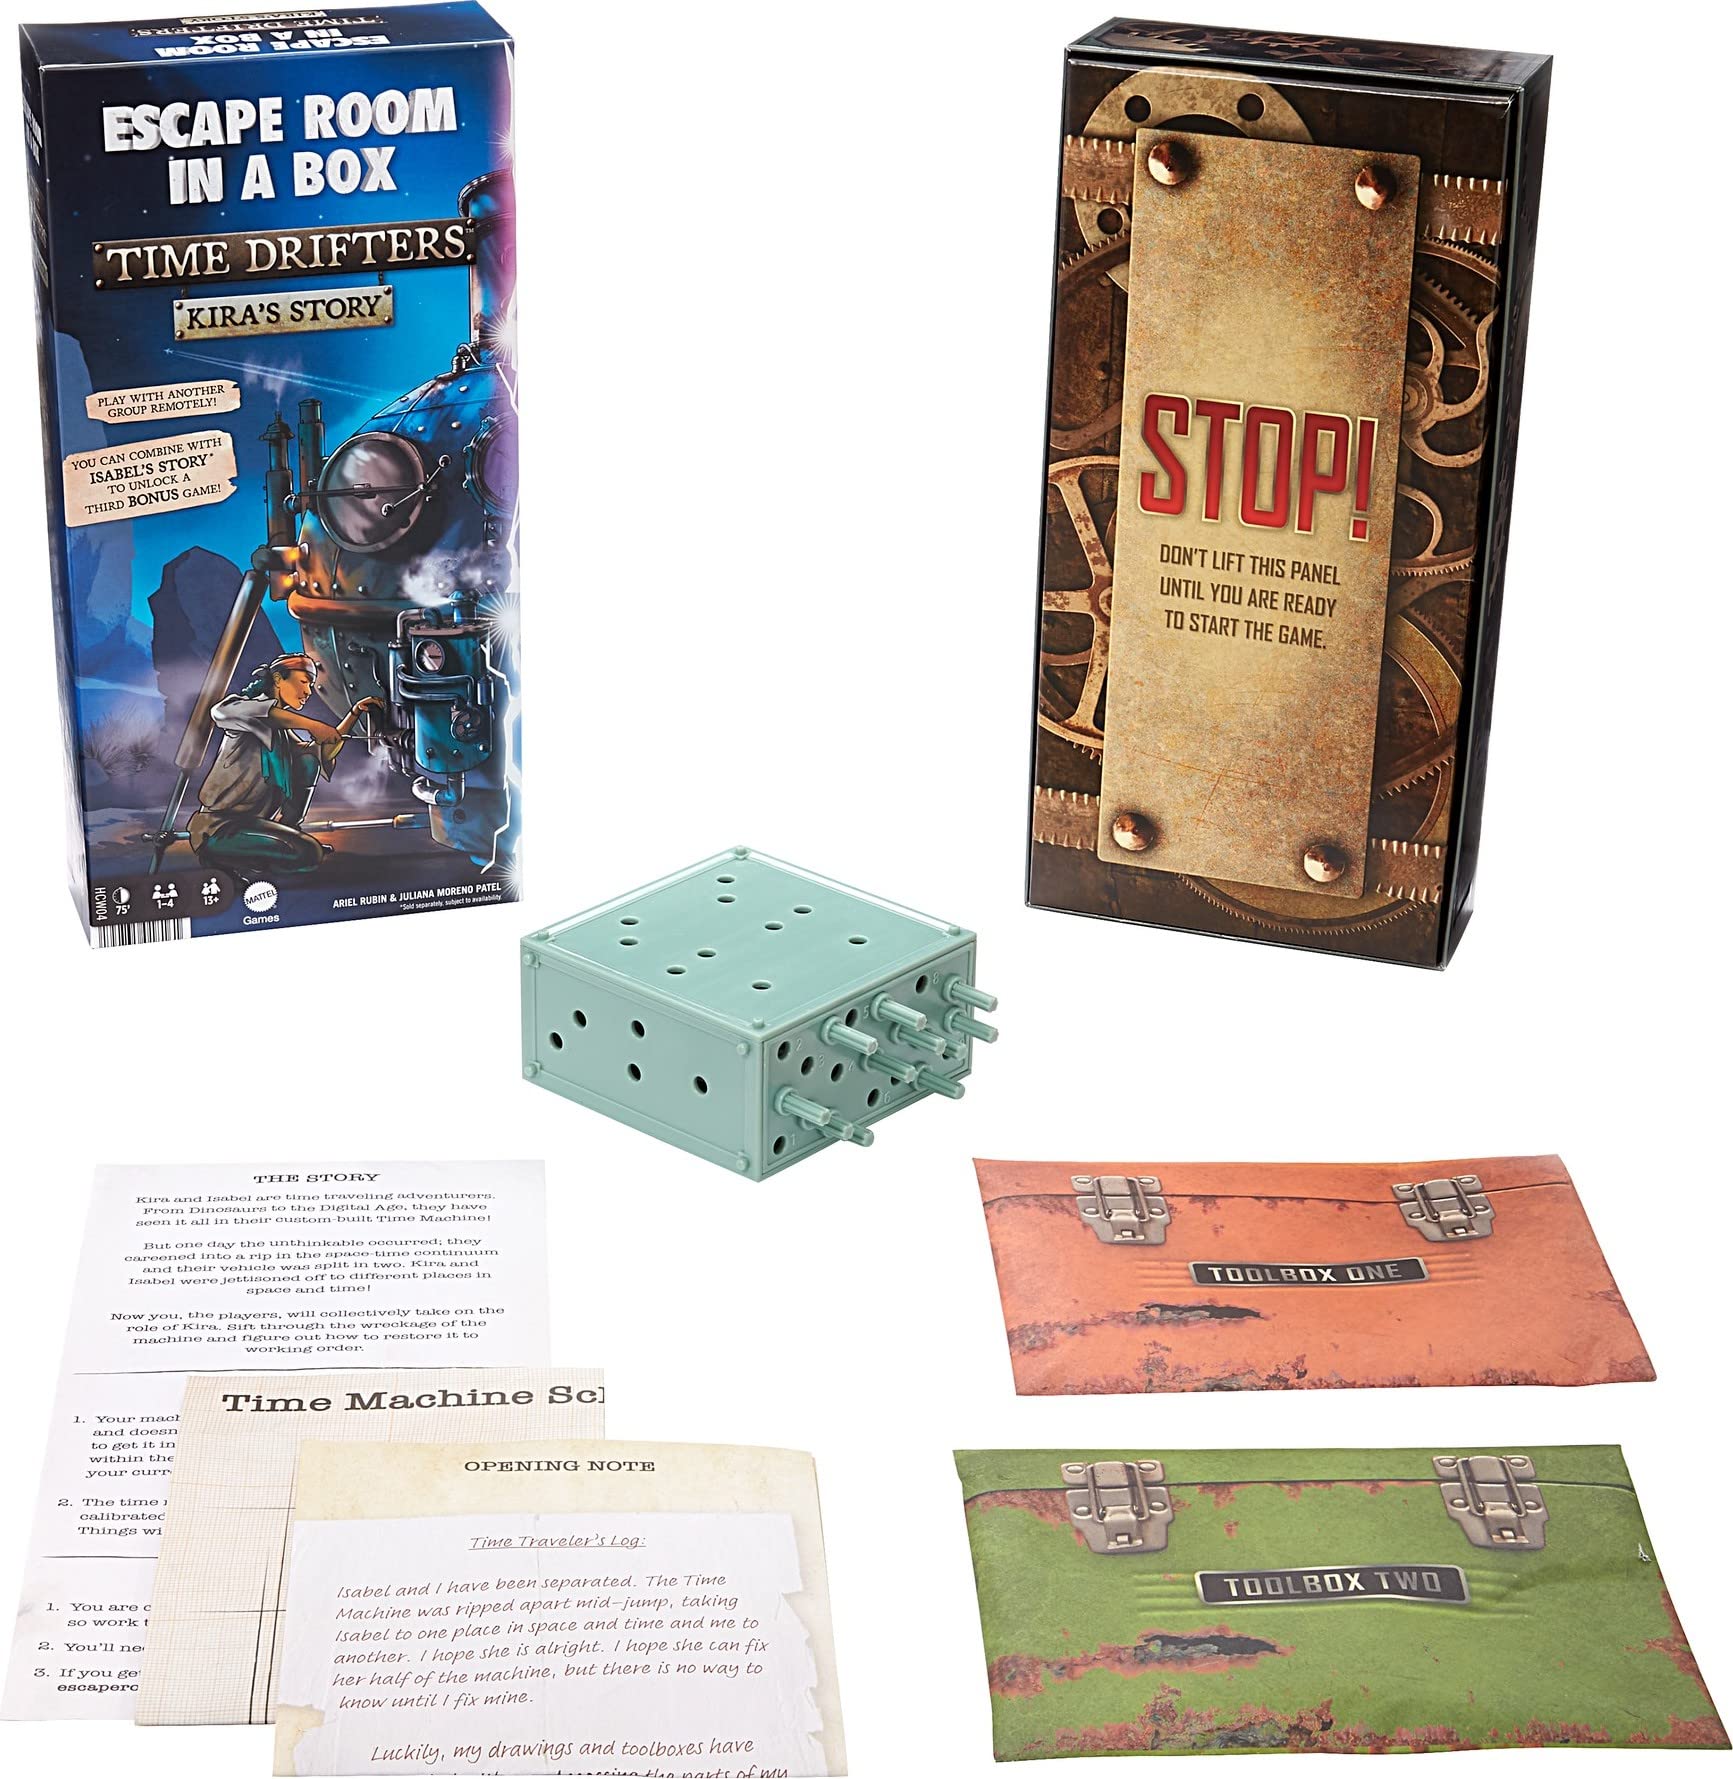 Escape Room in A Box: TIME Drifters KIRA's Story Party Game for 1 to 4 Players with Clues & Puzzles, Combine with Kira's Story for Remote Play, Gift for for 13 Year Olds & Up